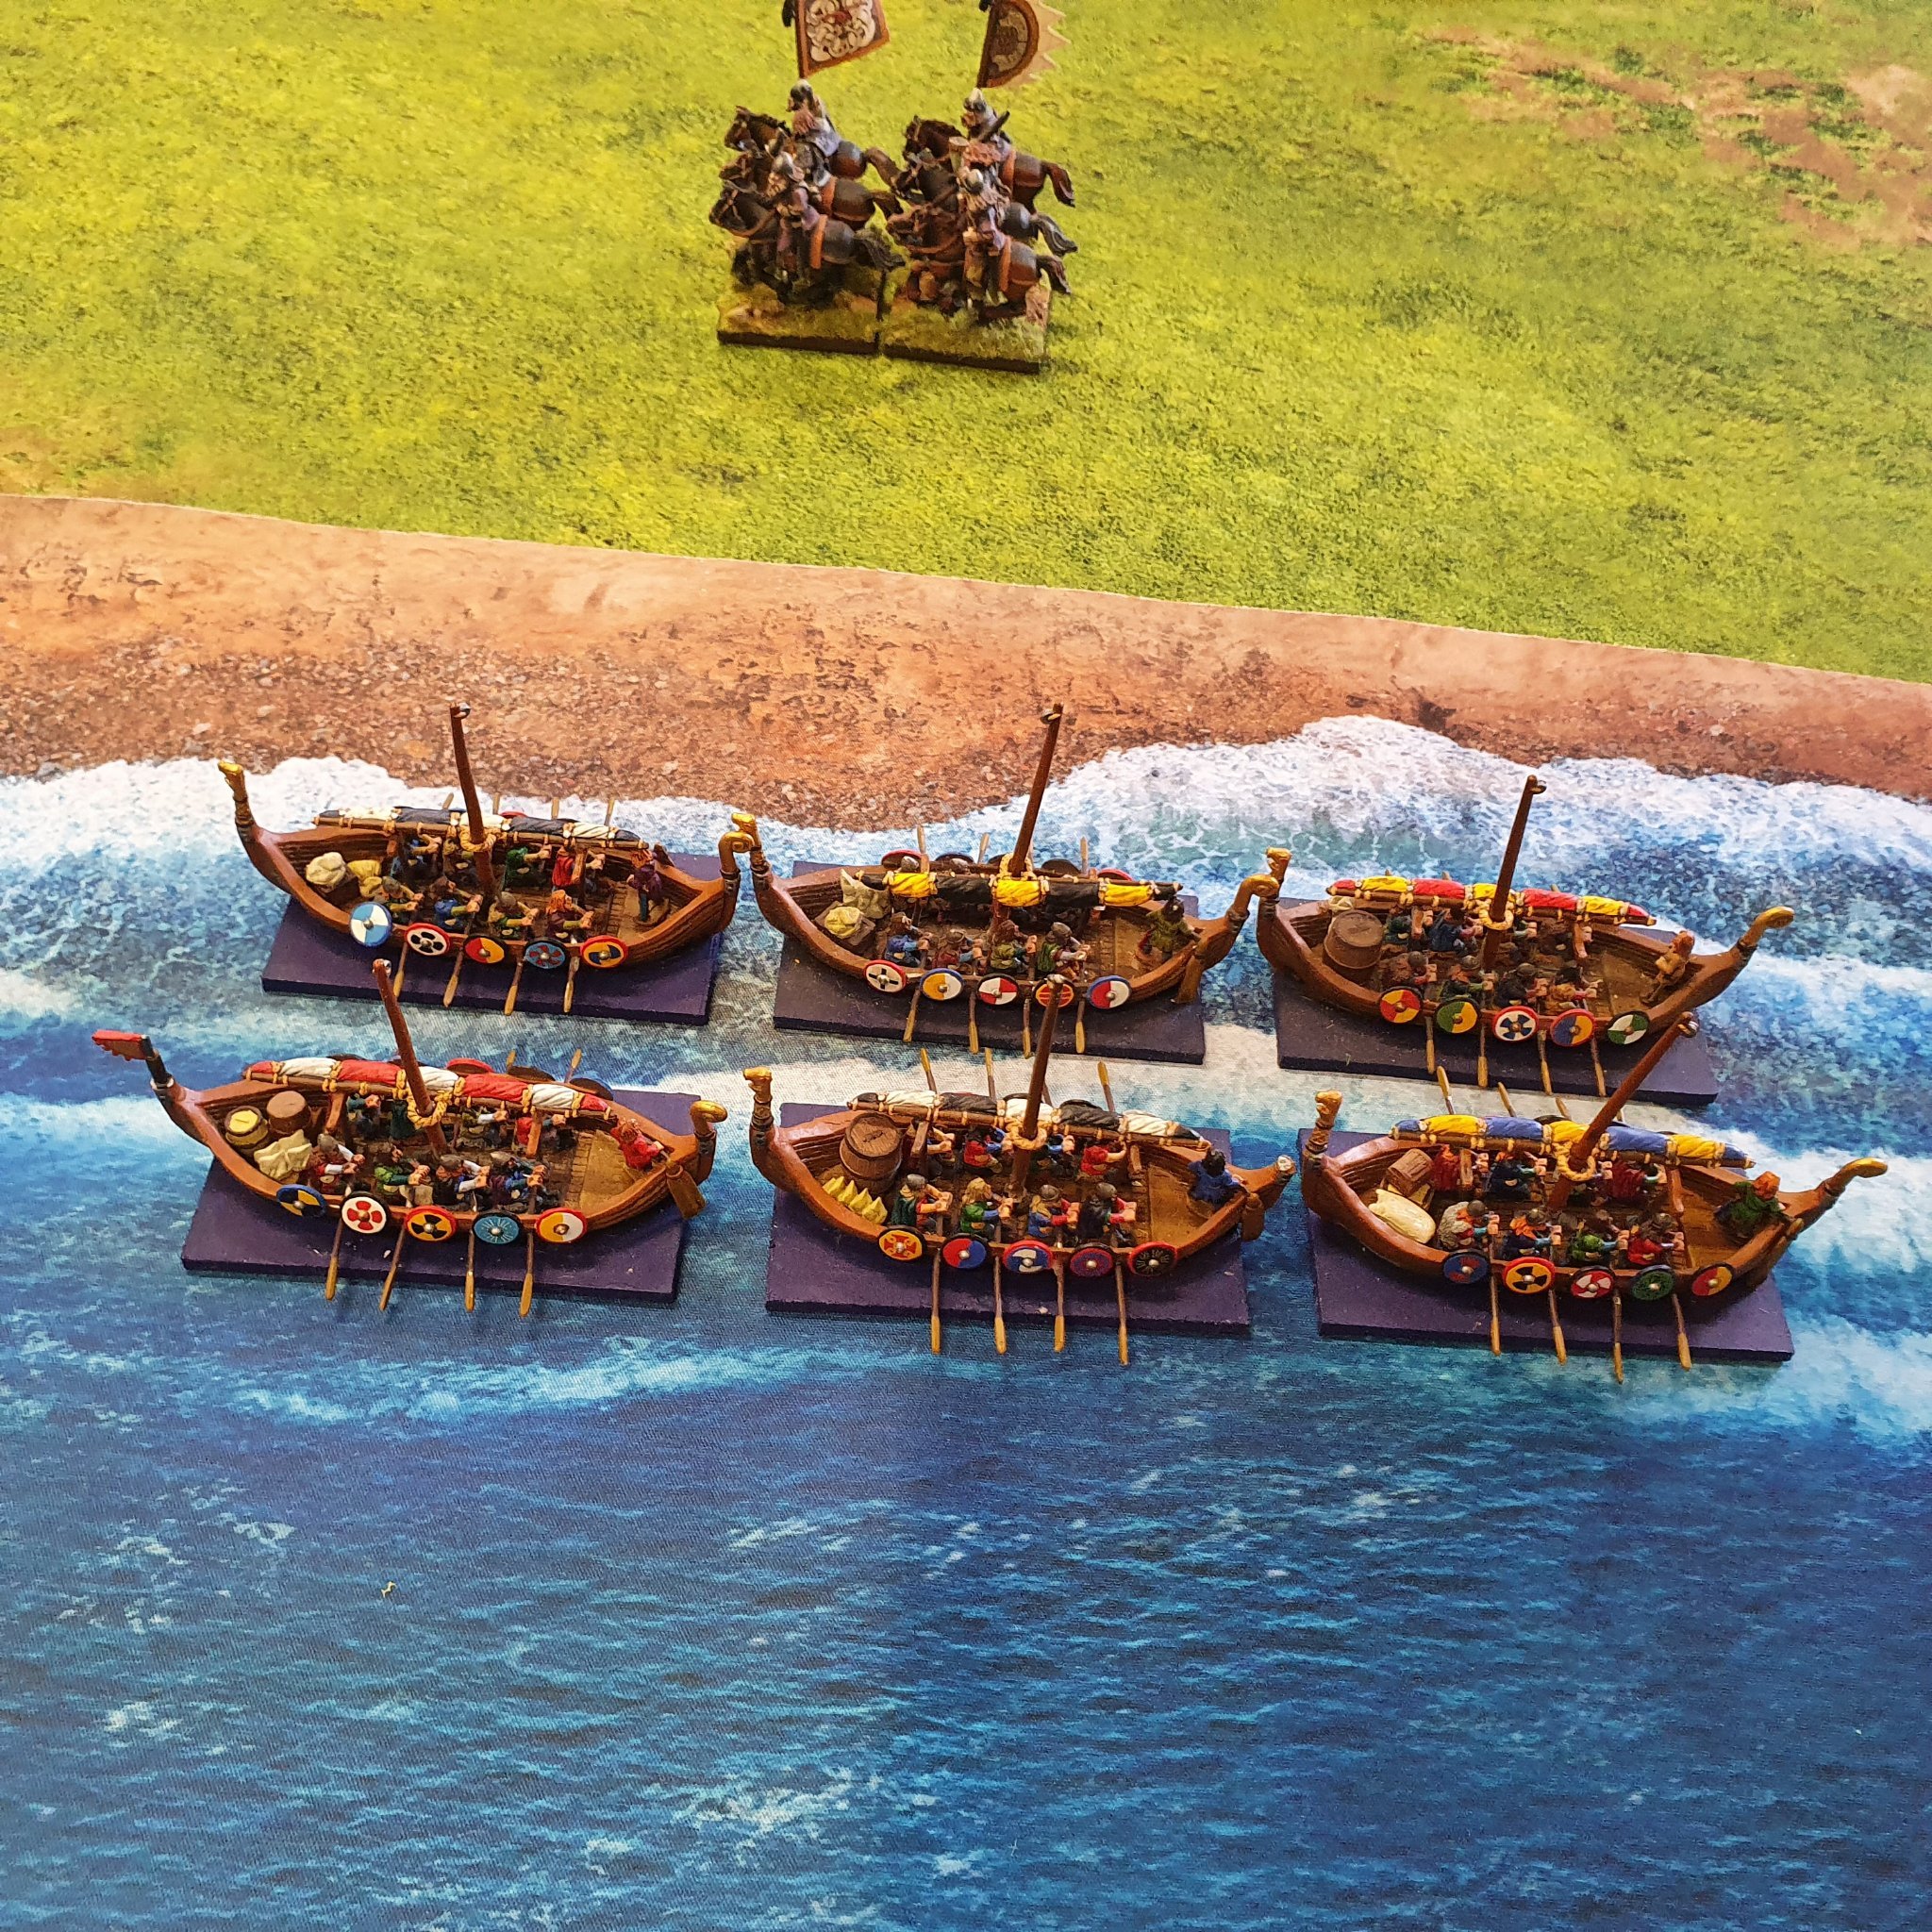  DBMM: Vikings arrive on another shore to pillage and plunder 